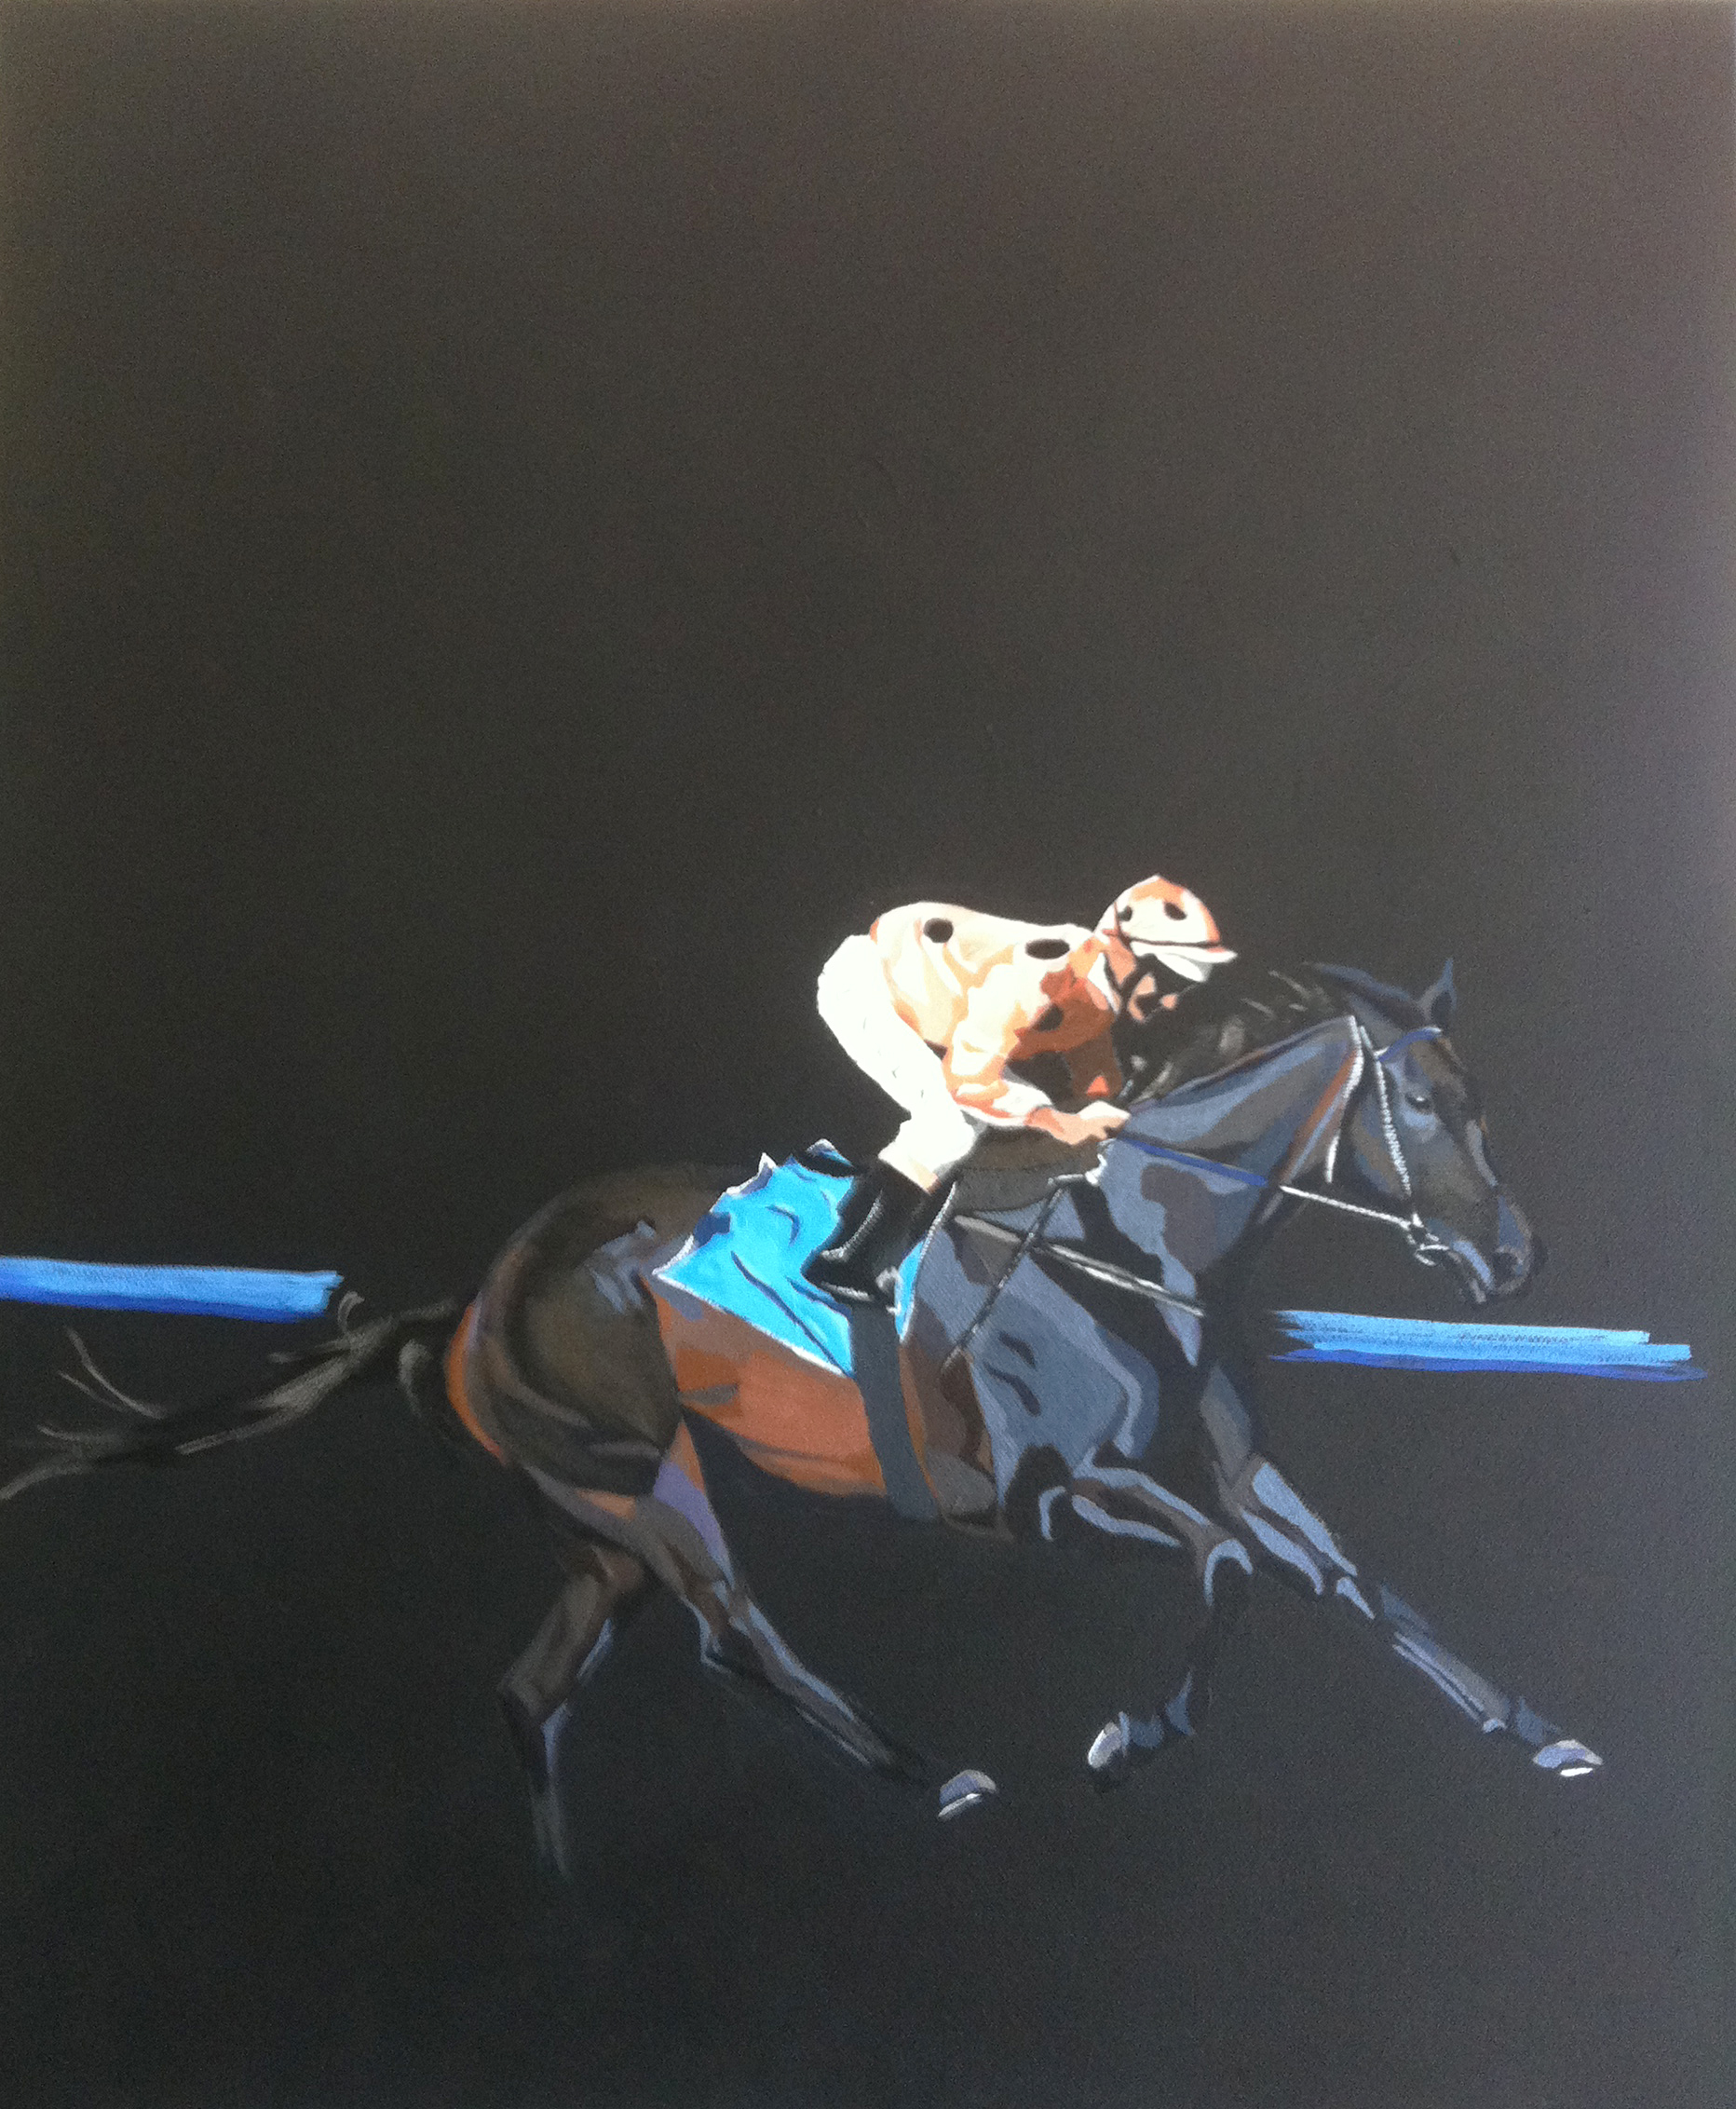     Black Caviar.    crylic polymer on canvas. 35 x 45 cm&nbsp; ©&nbsp; 2012 Ida Montague  Auctioned at charity event.    